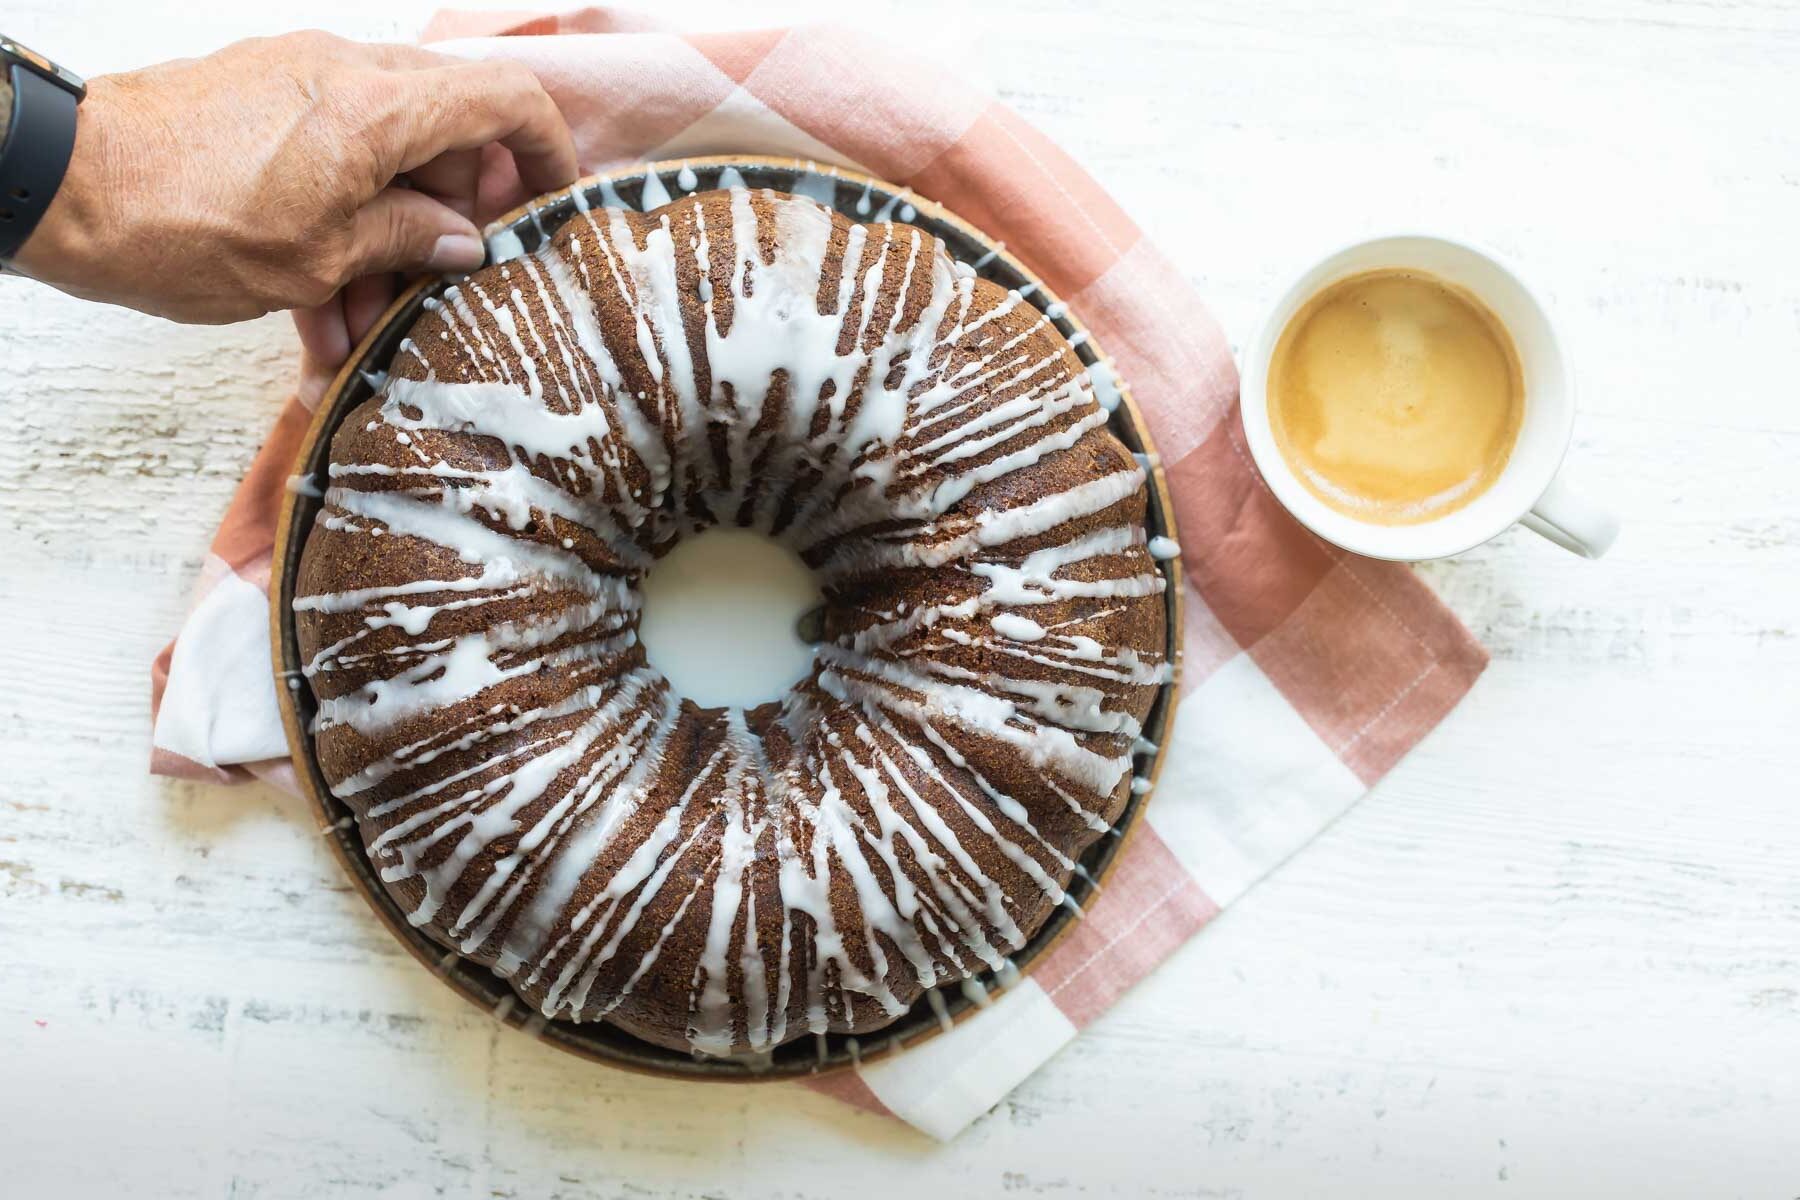 A round spice cake with drizzled icing.